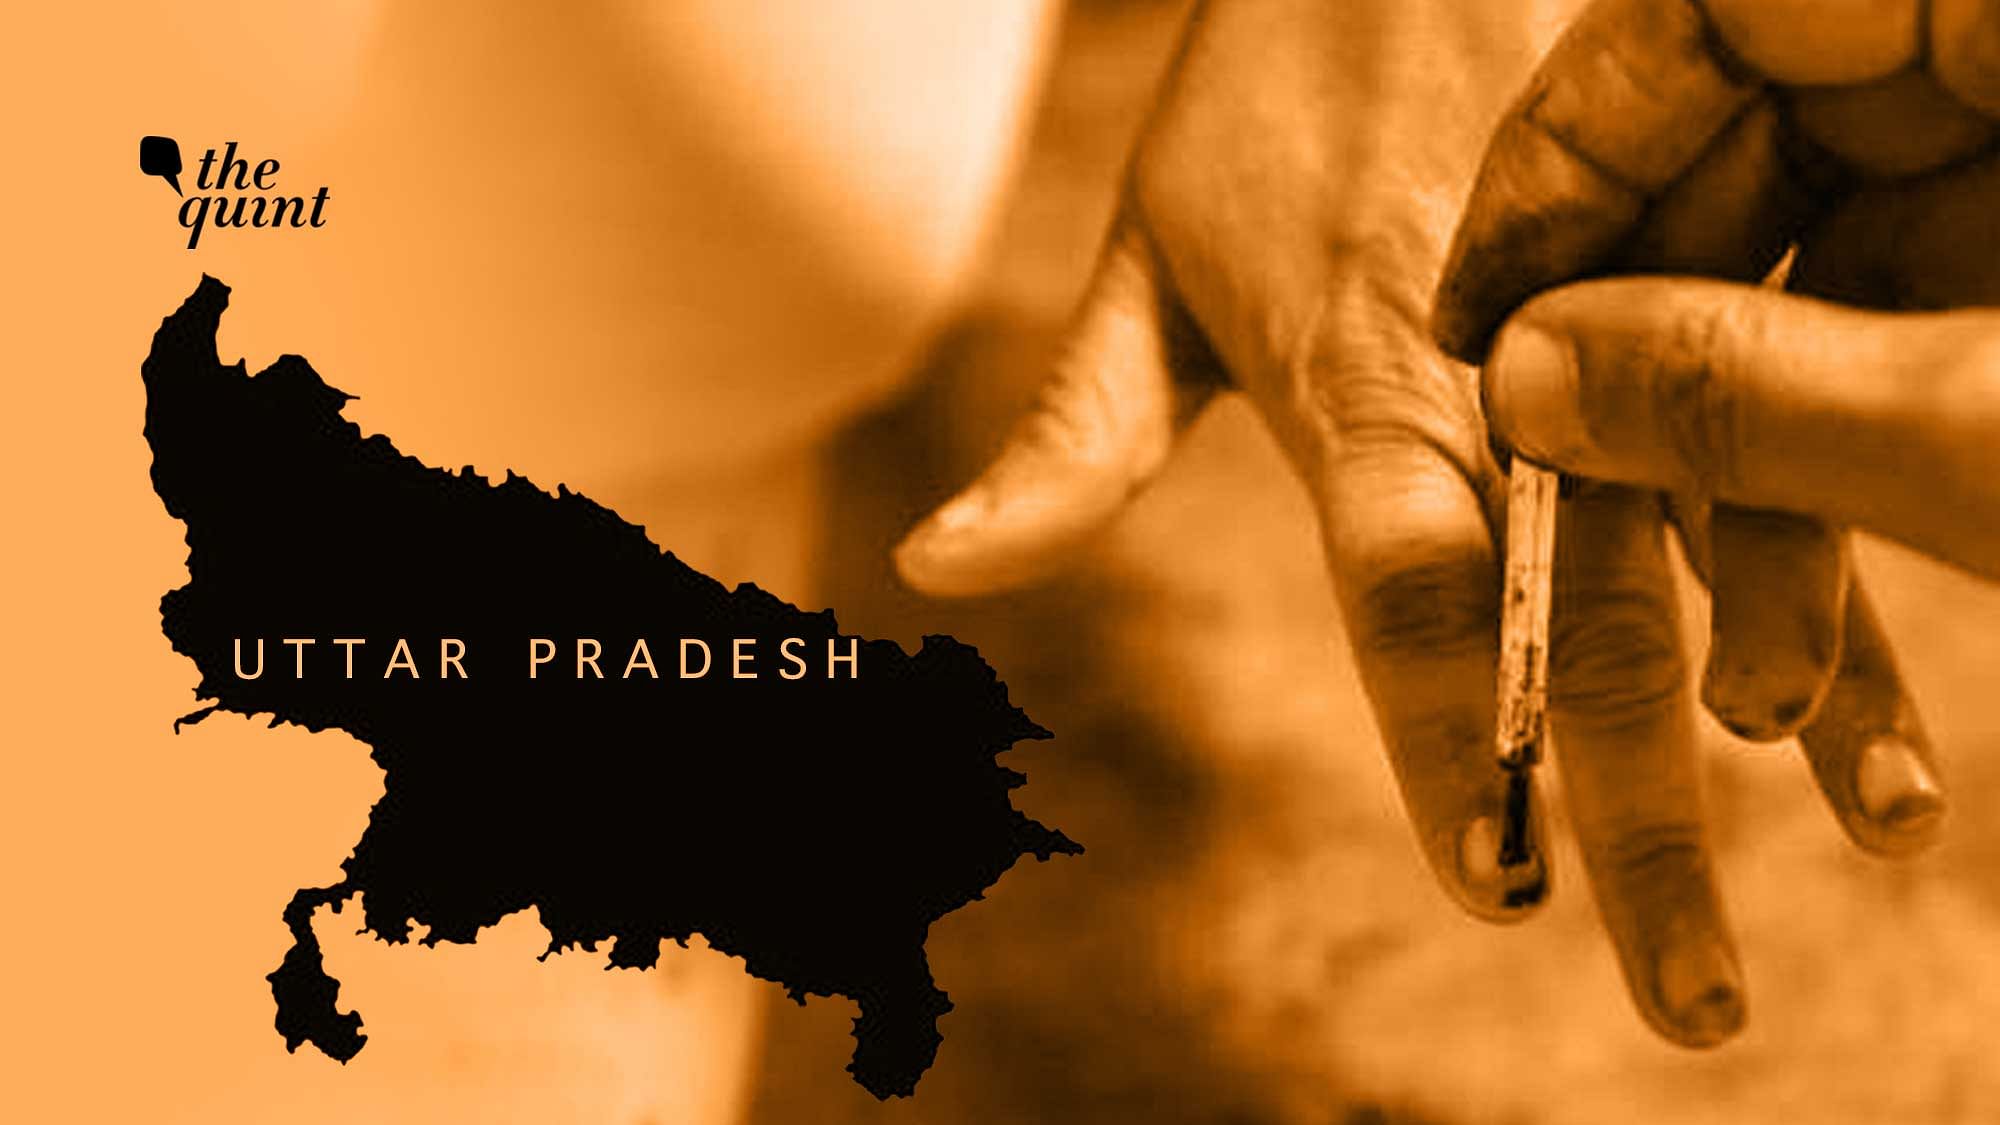 While a horrific second wave of COVID had already started battering the country in April, the densely populated state of Uttar Pradesh was holding panchayat polls.